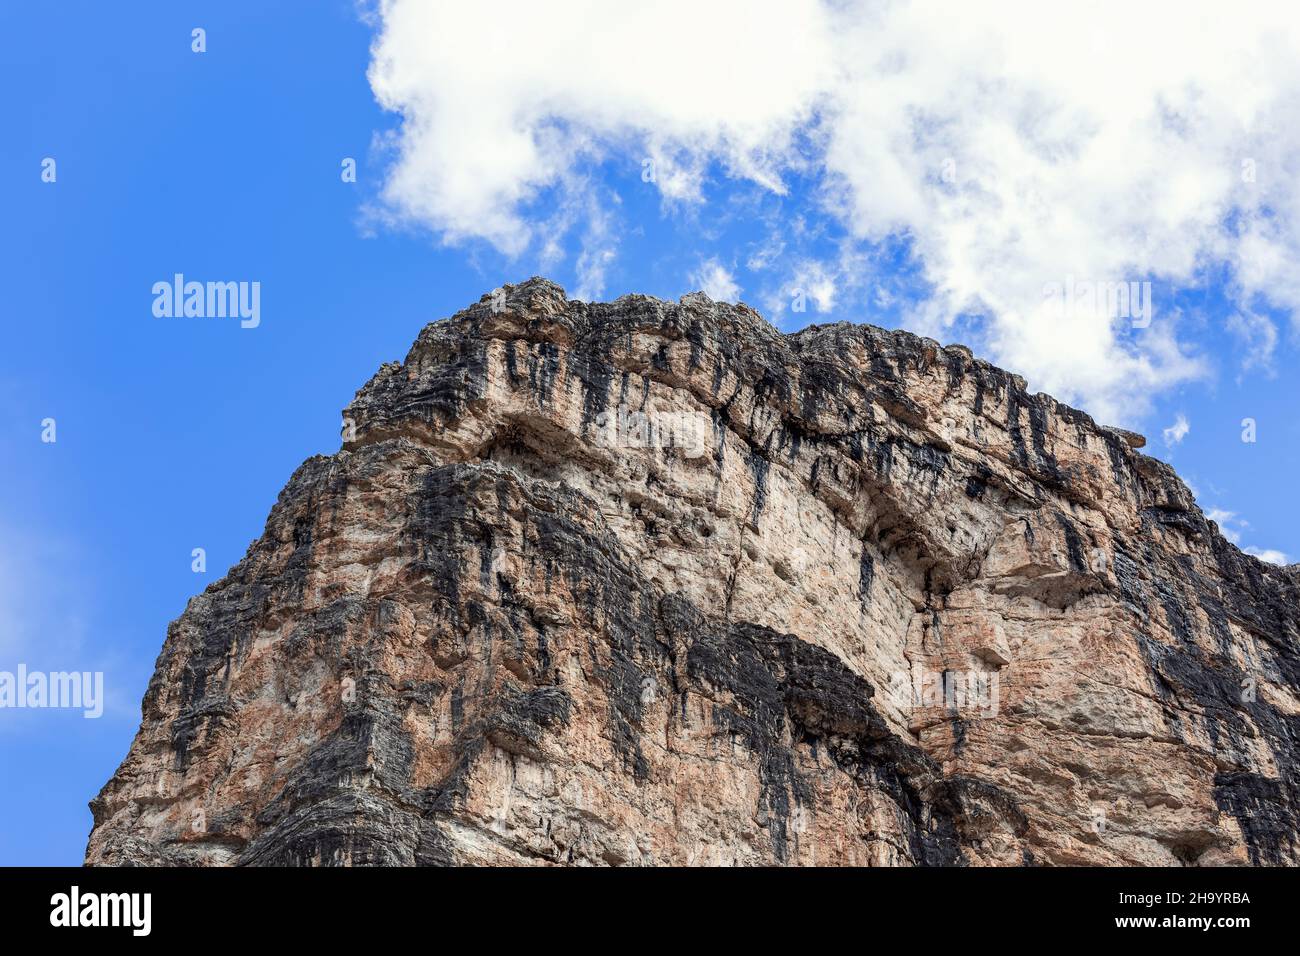 Dolomite rock peak with typical texture and color against blue sky Stock Photo